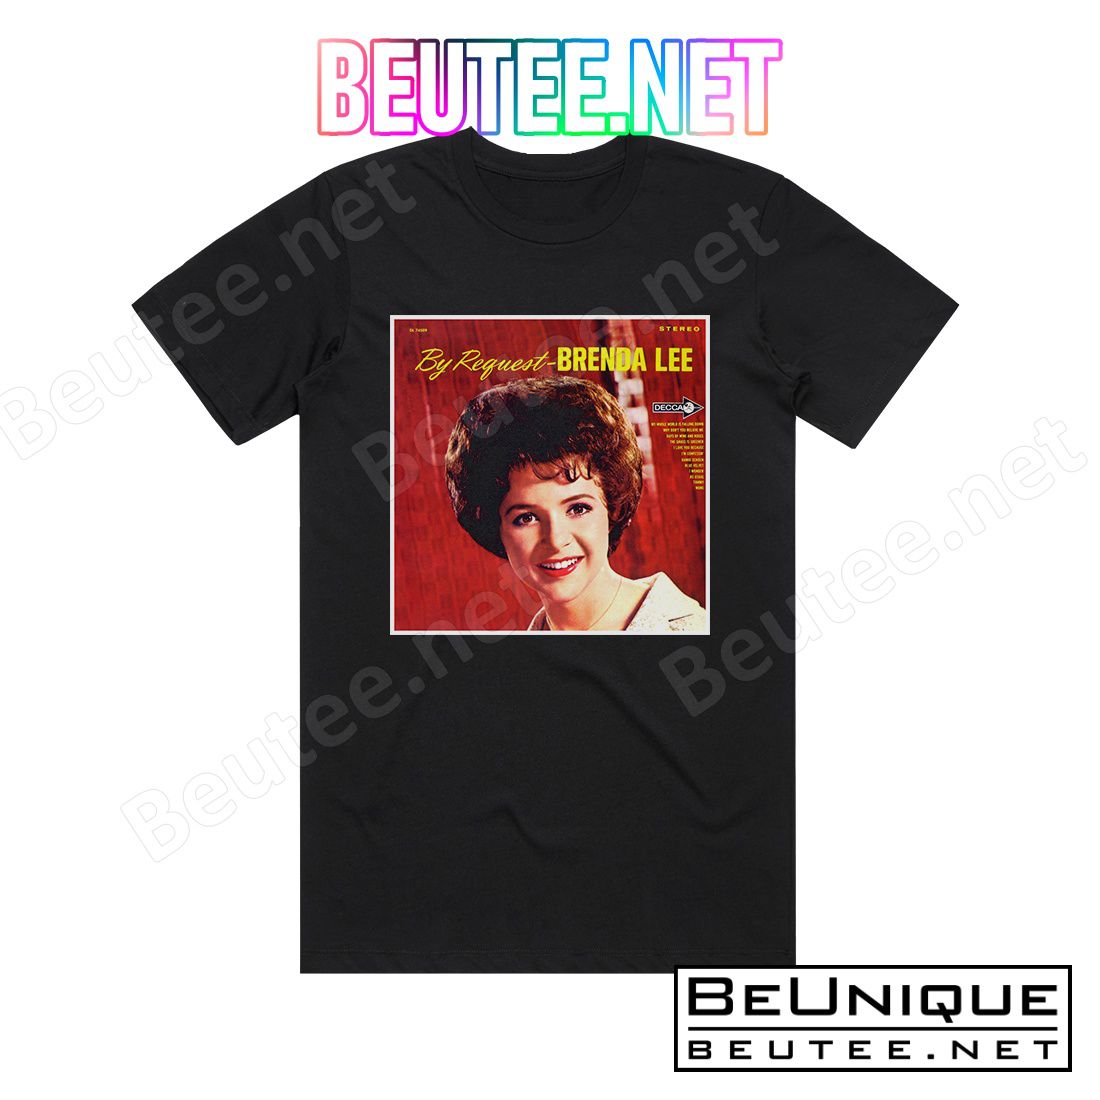 Brenda Lee By Request Album Cover T-Shirt